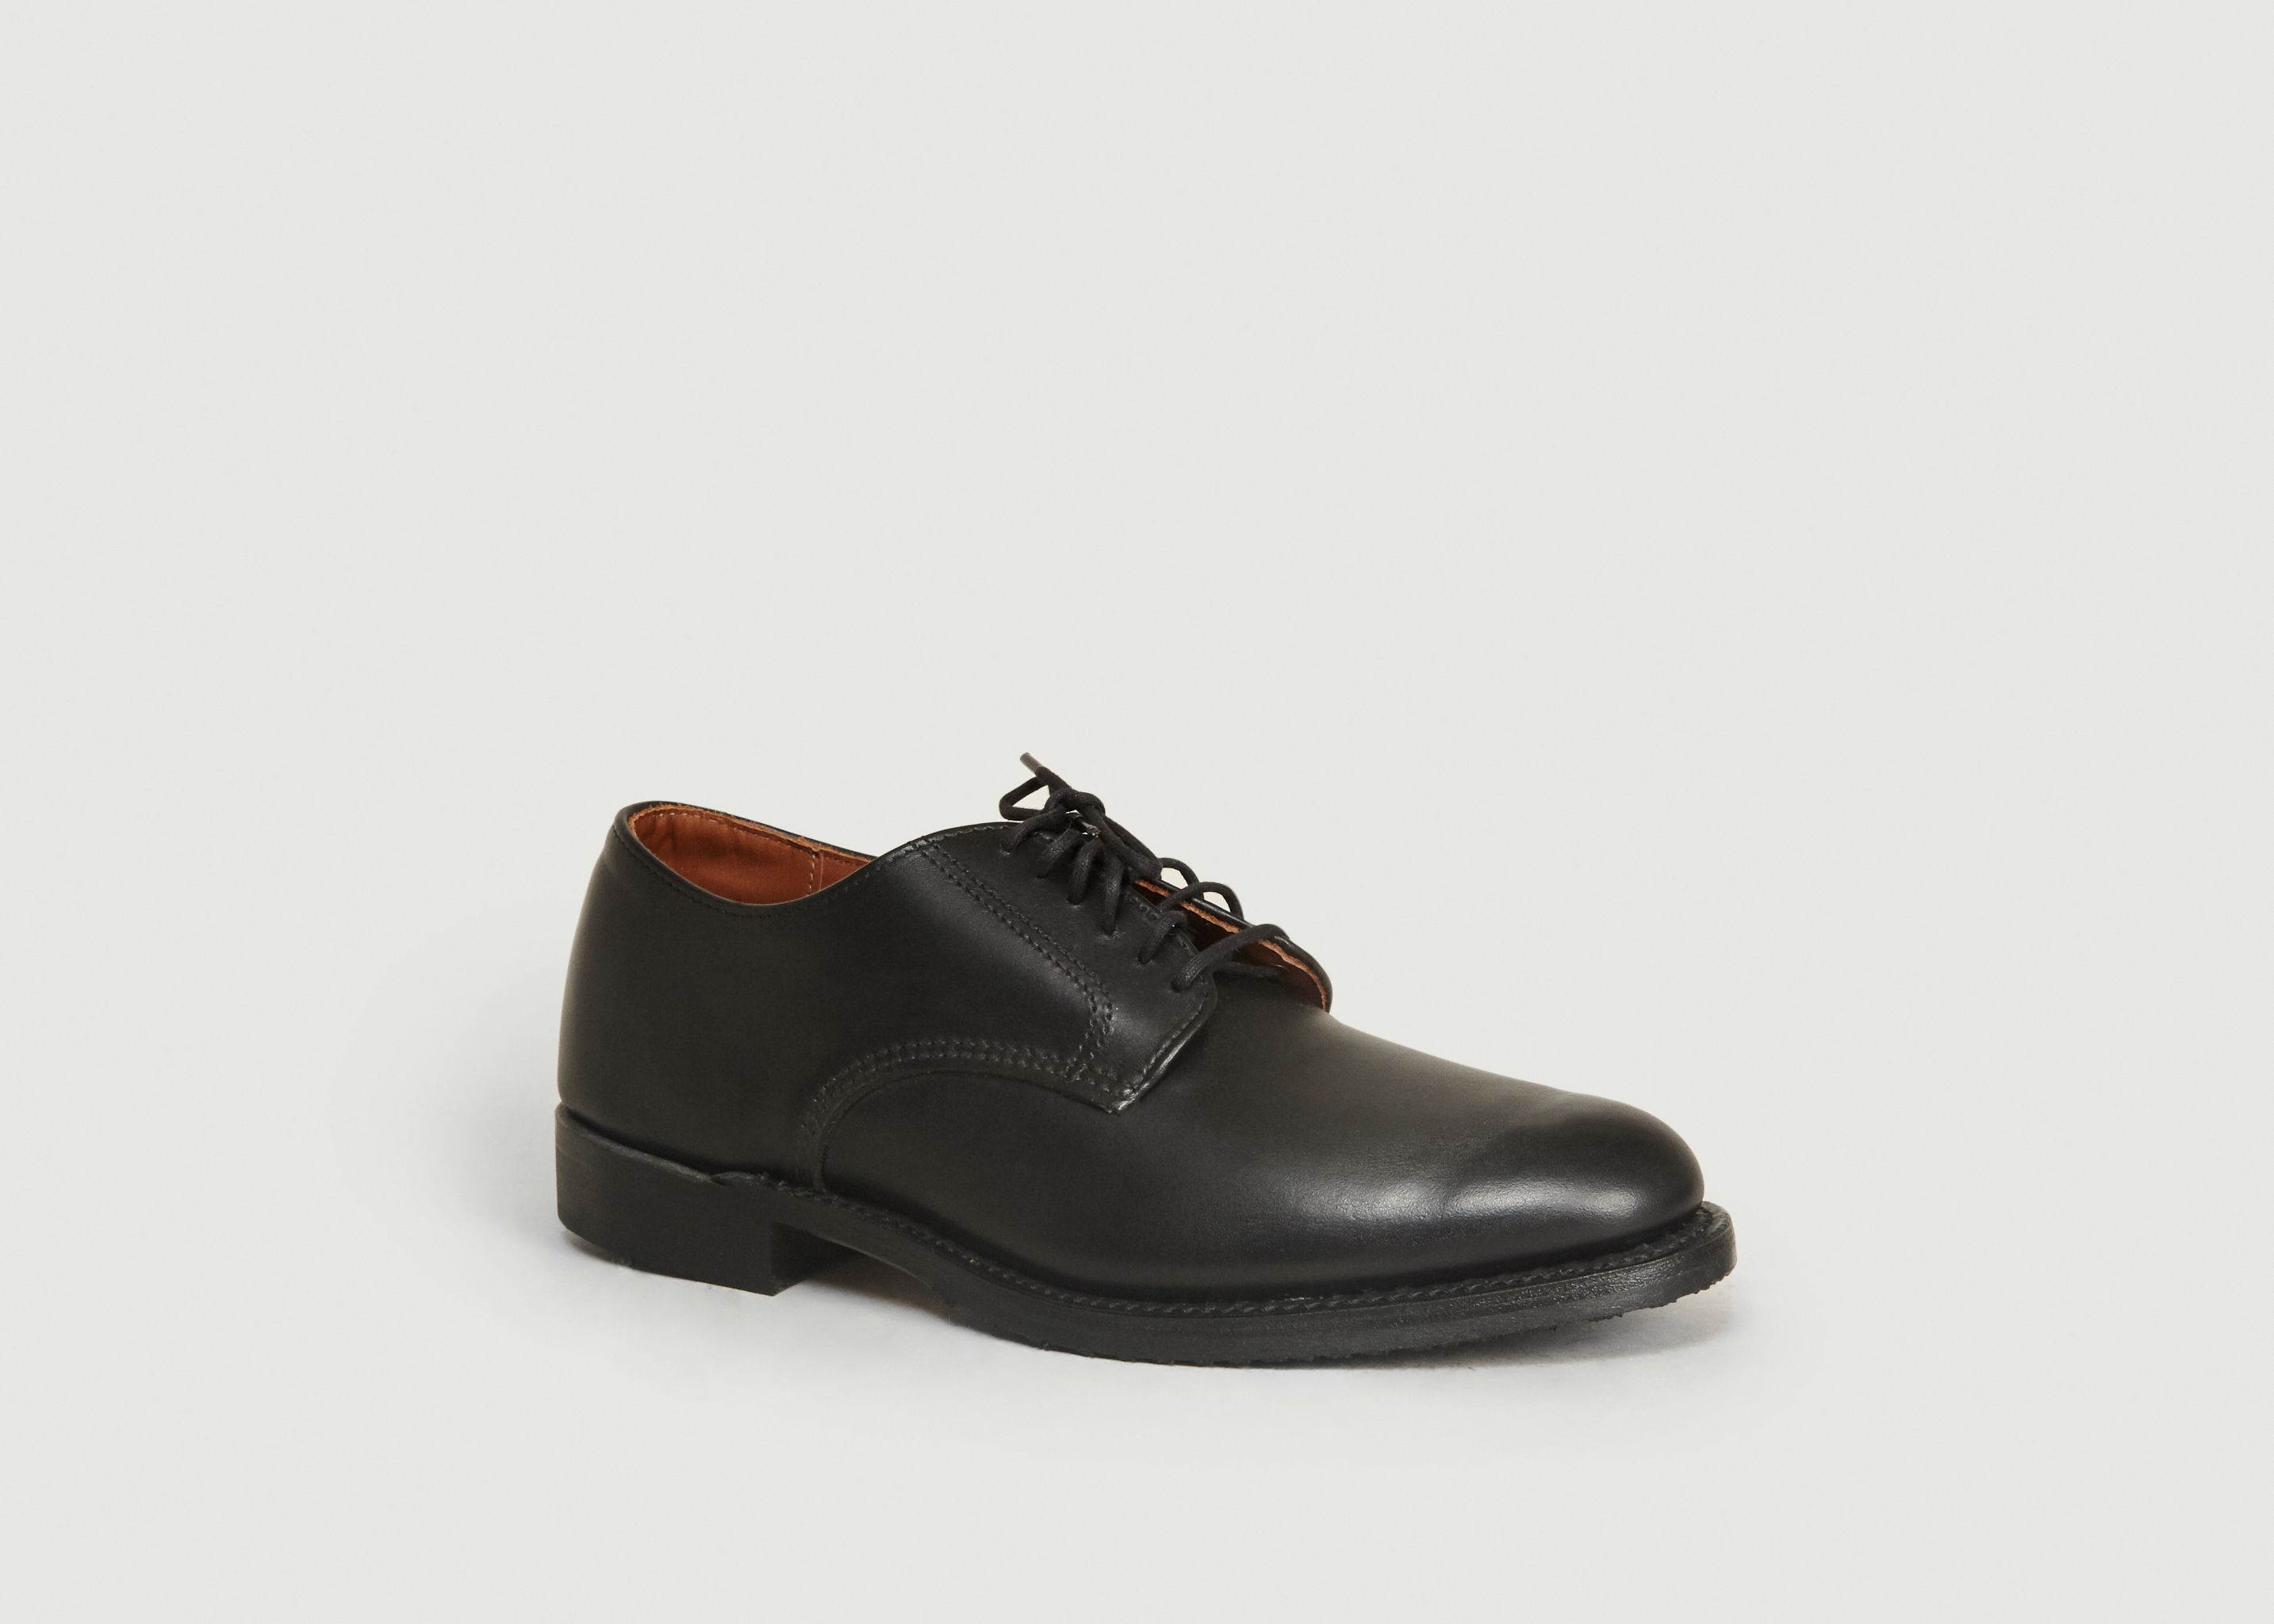 Williston Oxford Black Featherstone Derby Shoes - Red Wing Shoes